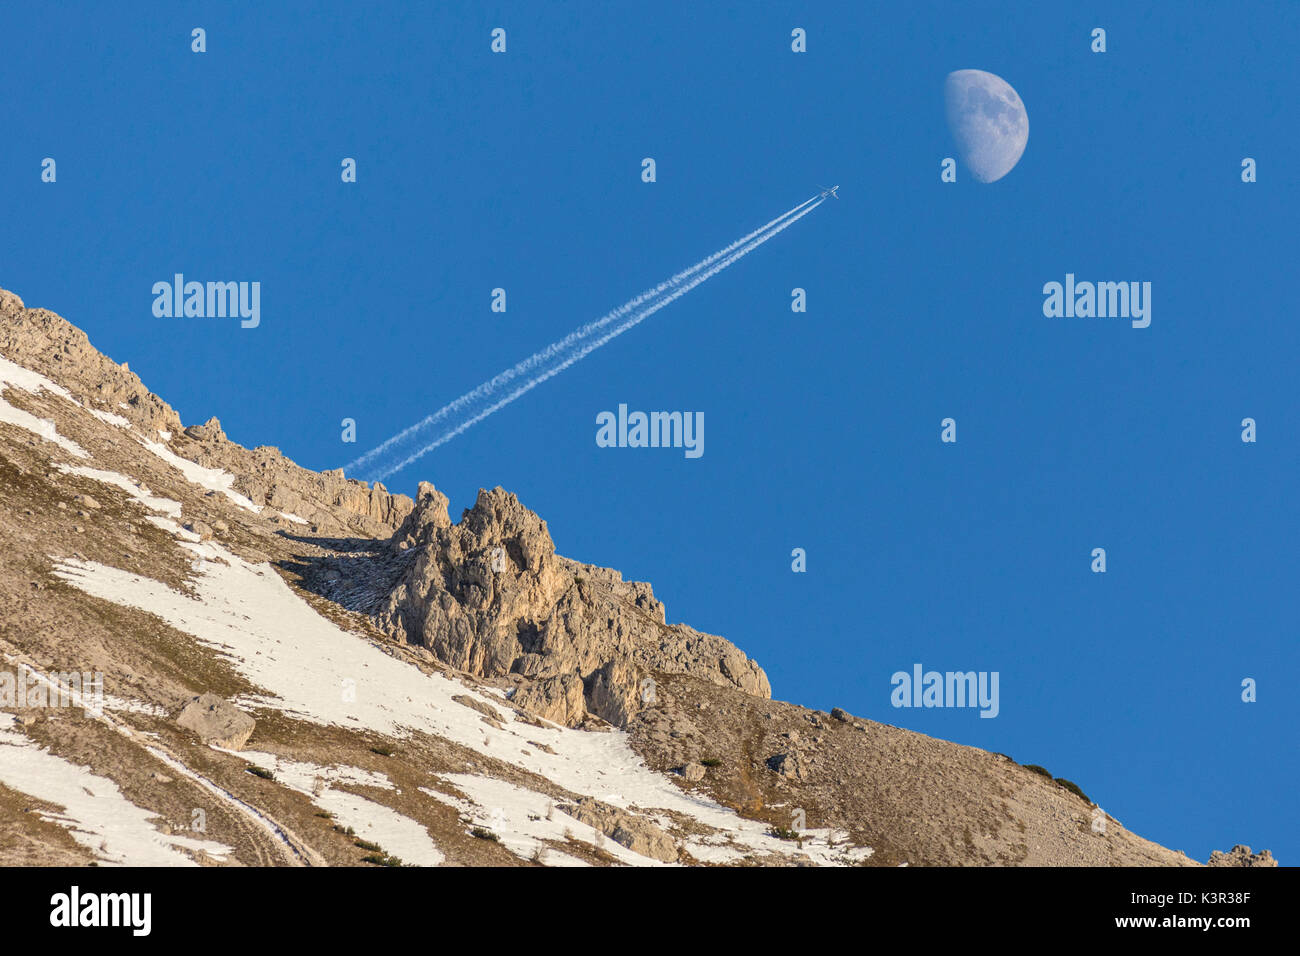 The plane and the moon in the blue sky of Dolomites Auronzo of Cadore Veneto Italy Europe Stock Photo